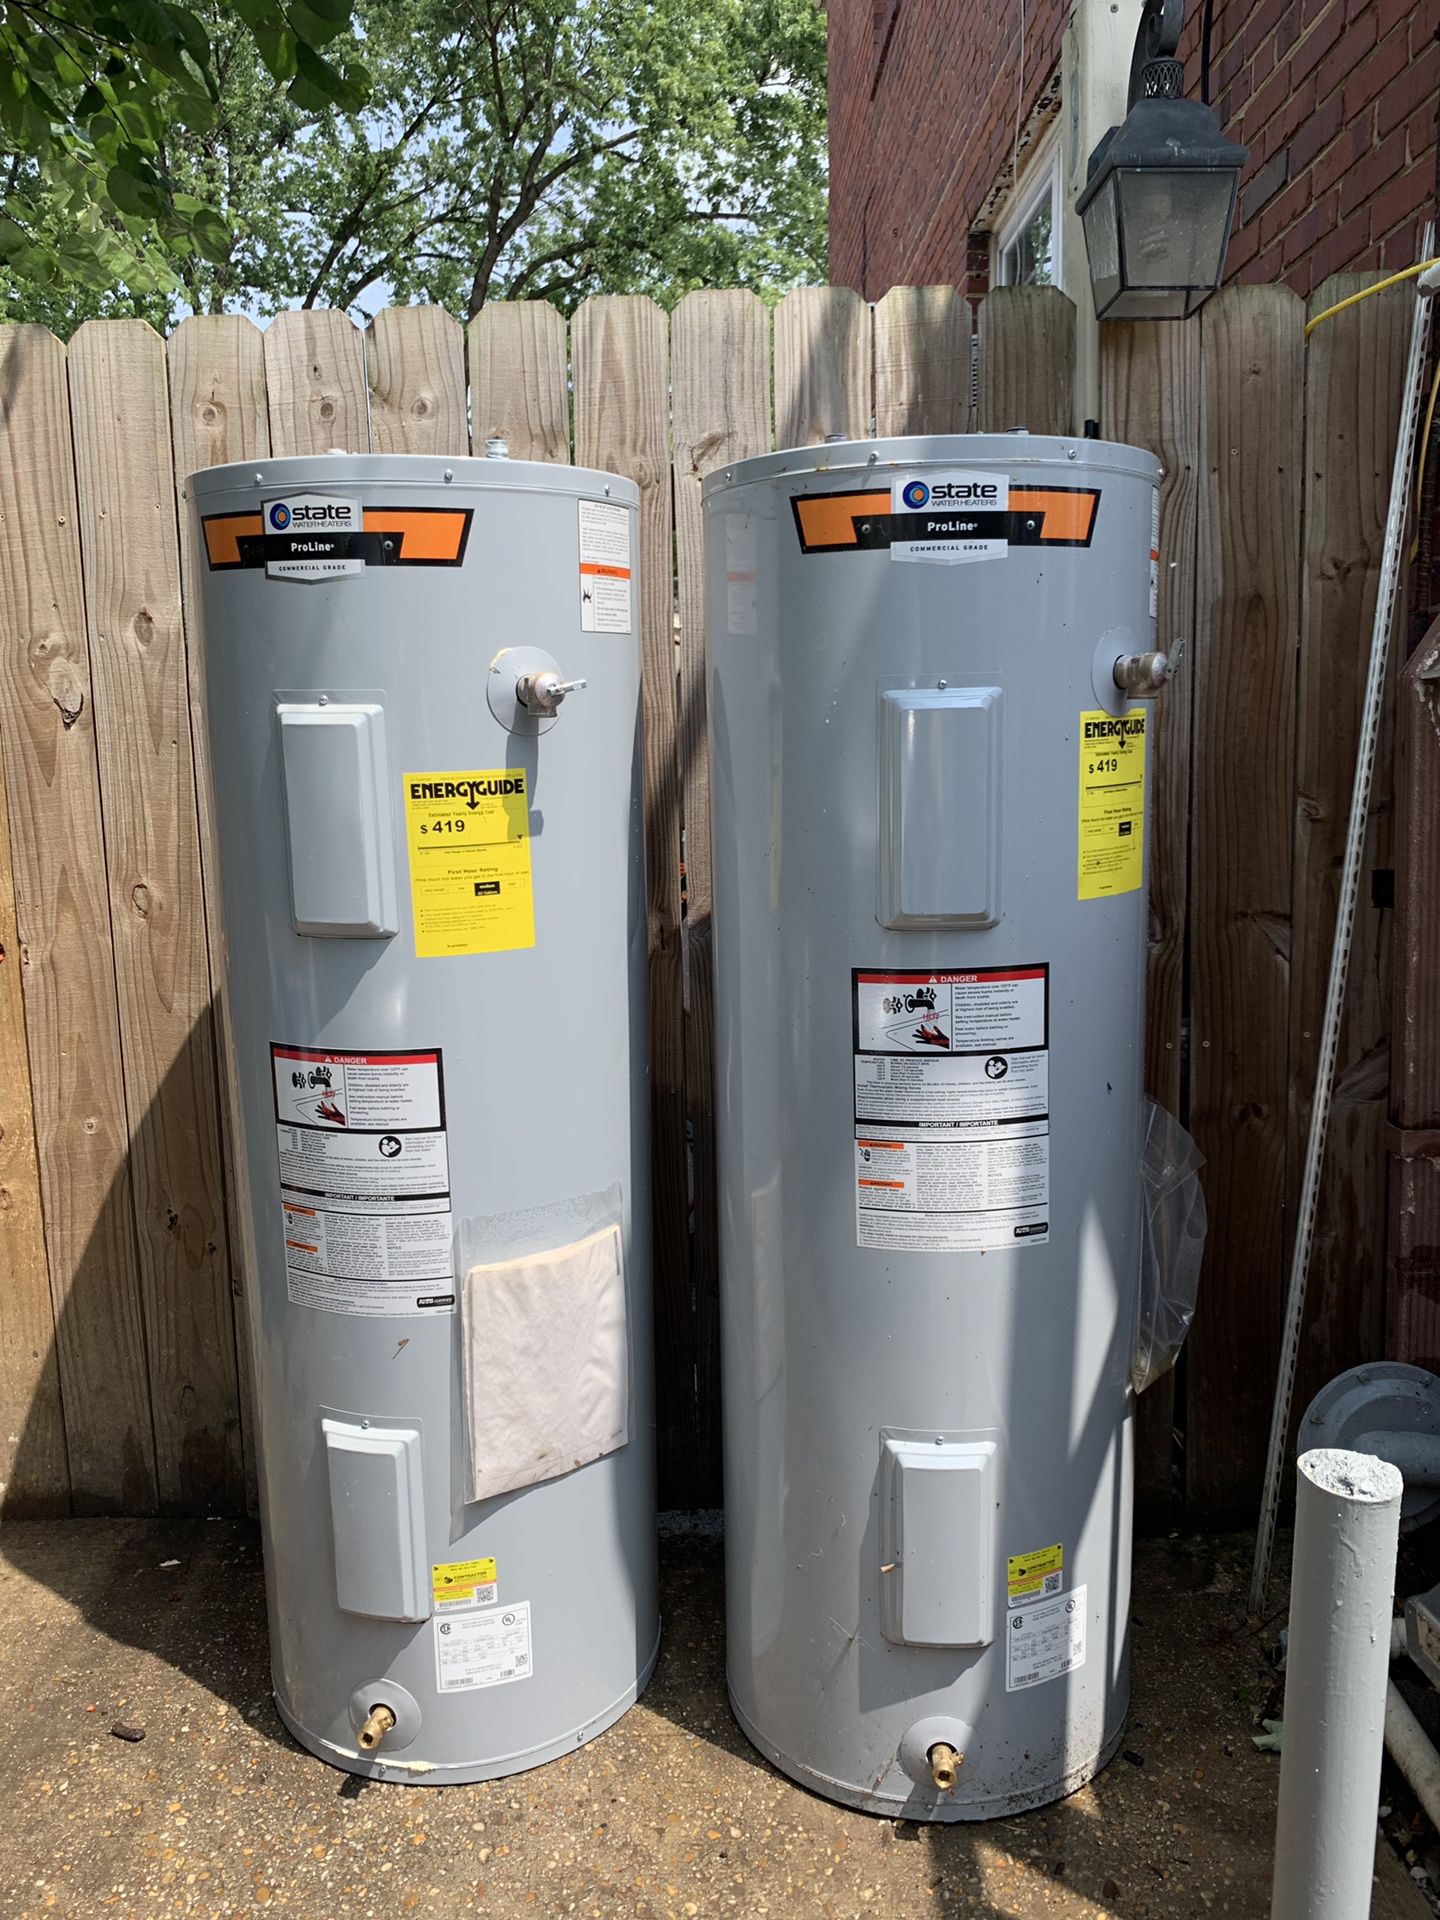 Home appliances. Water heaters for sale $200. Each electric they are both like new this two units were install by mistake by installer where the unit